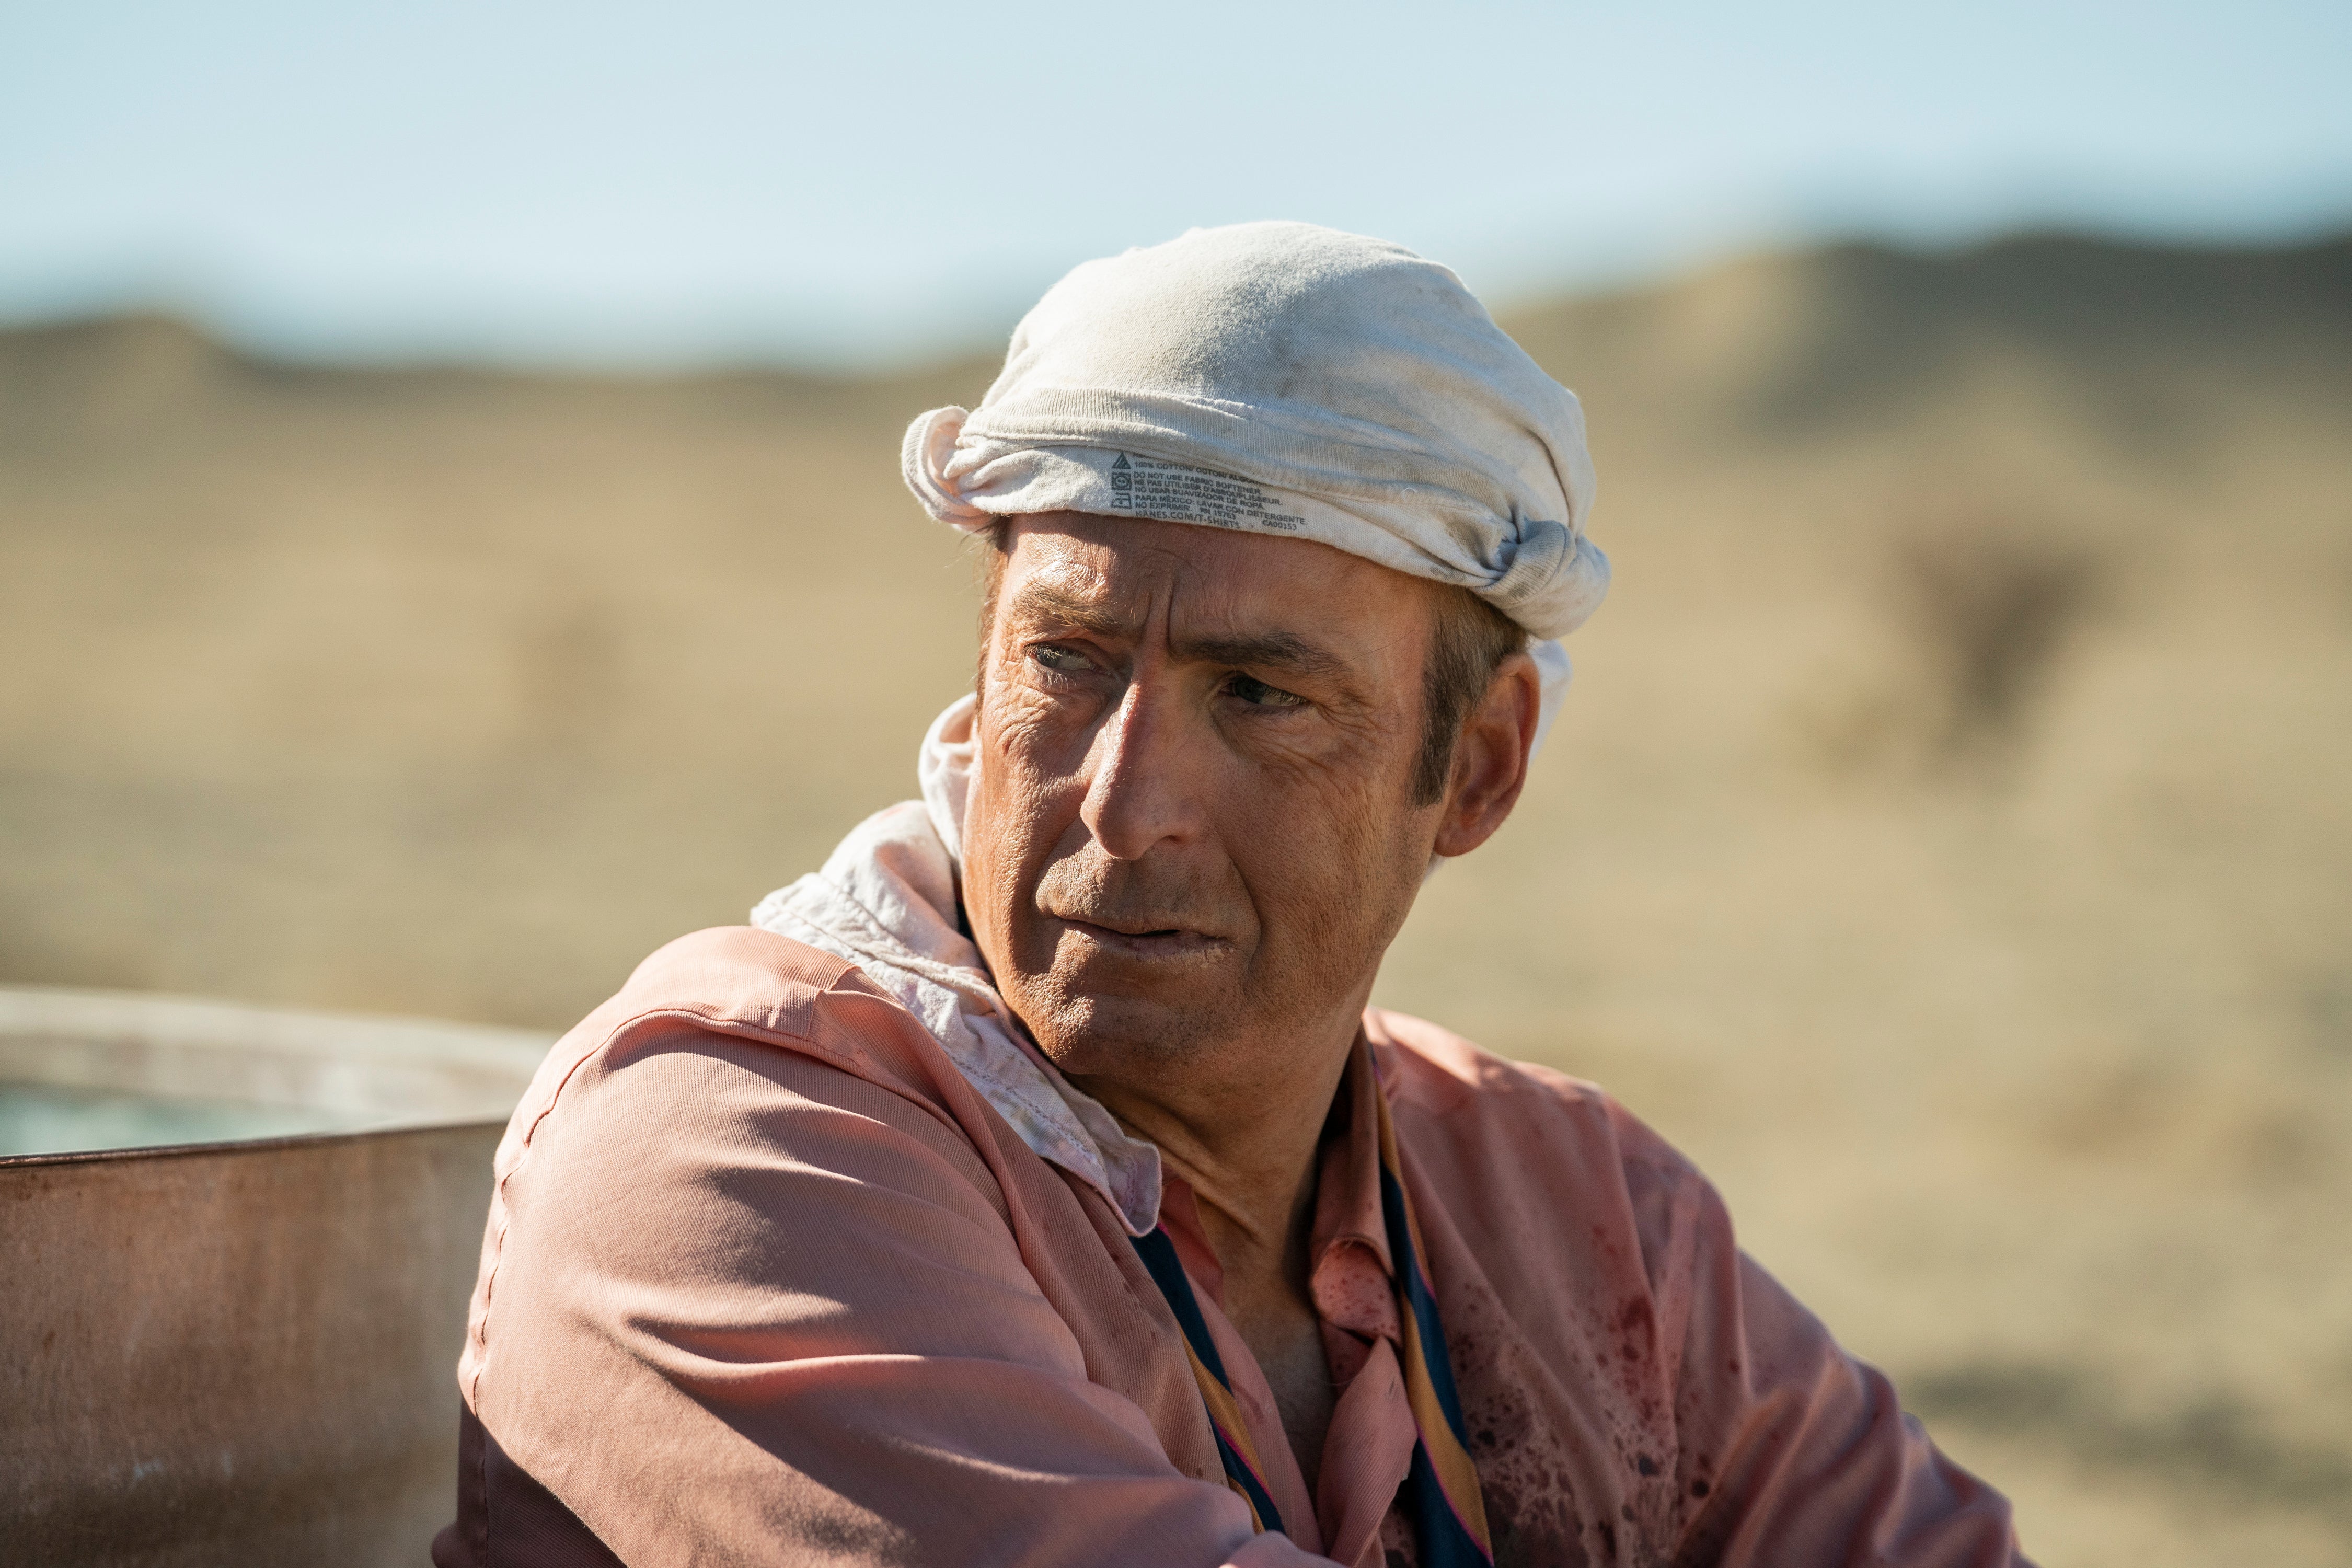 Odenkirk as troubled loner Saul/Jimmy in ‘Better Call Saul’